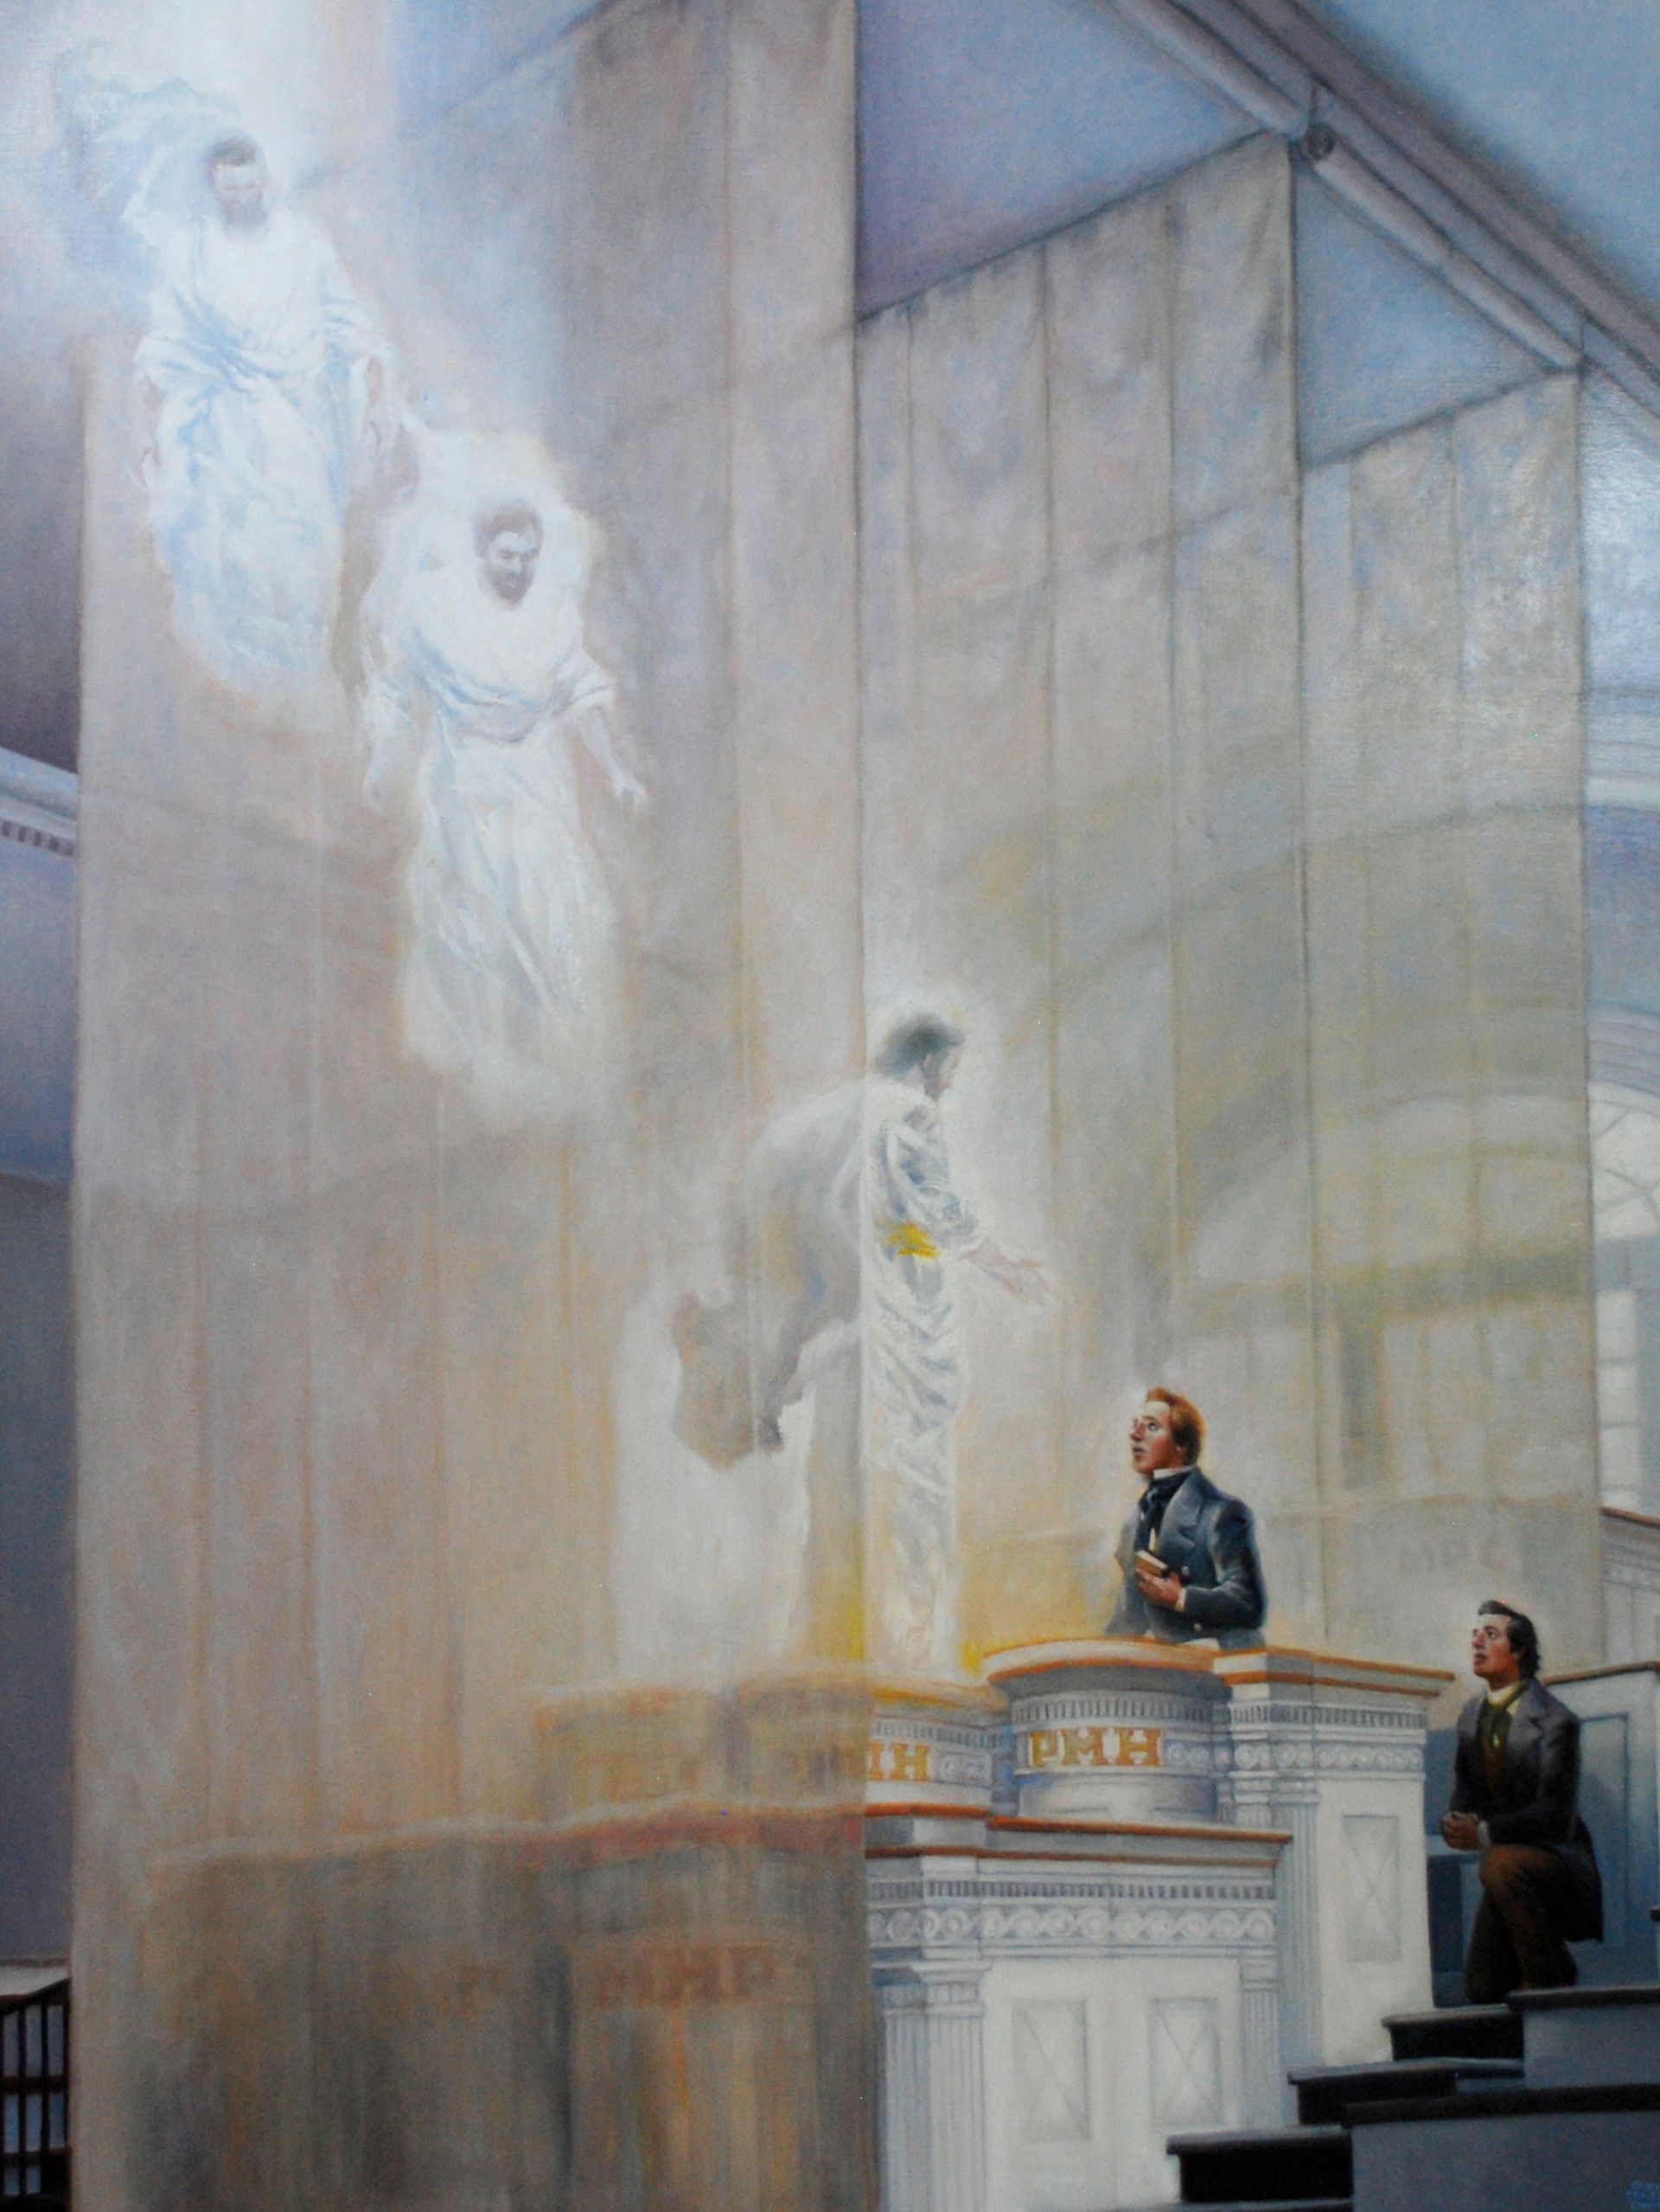 "Vision in the Kirtland Temple," by Gary E. Smith.